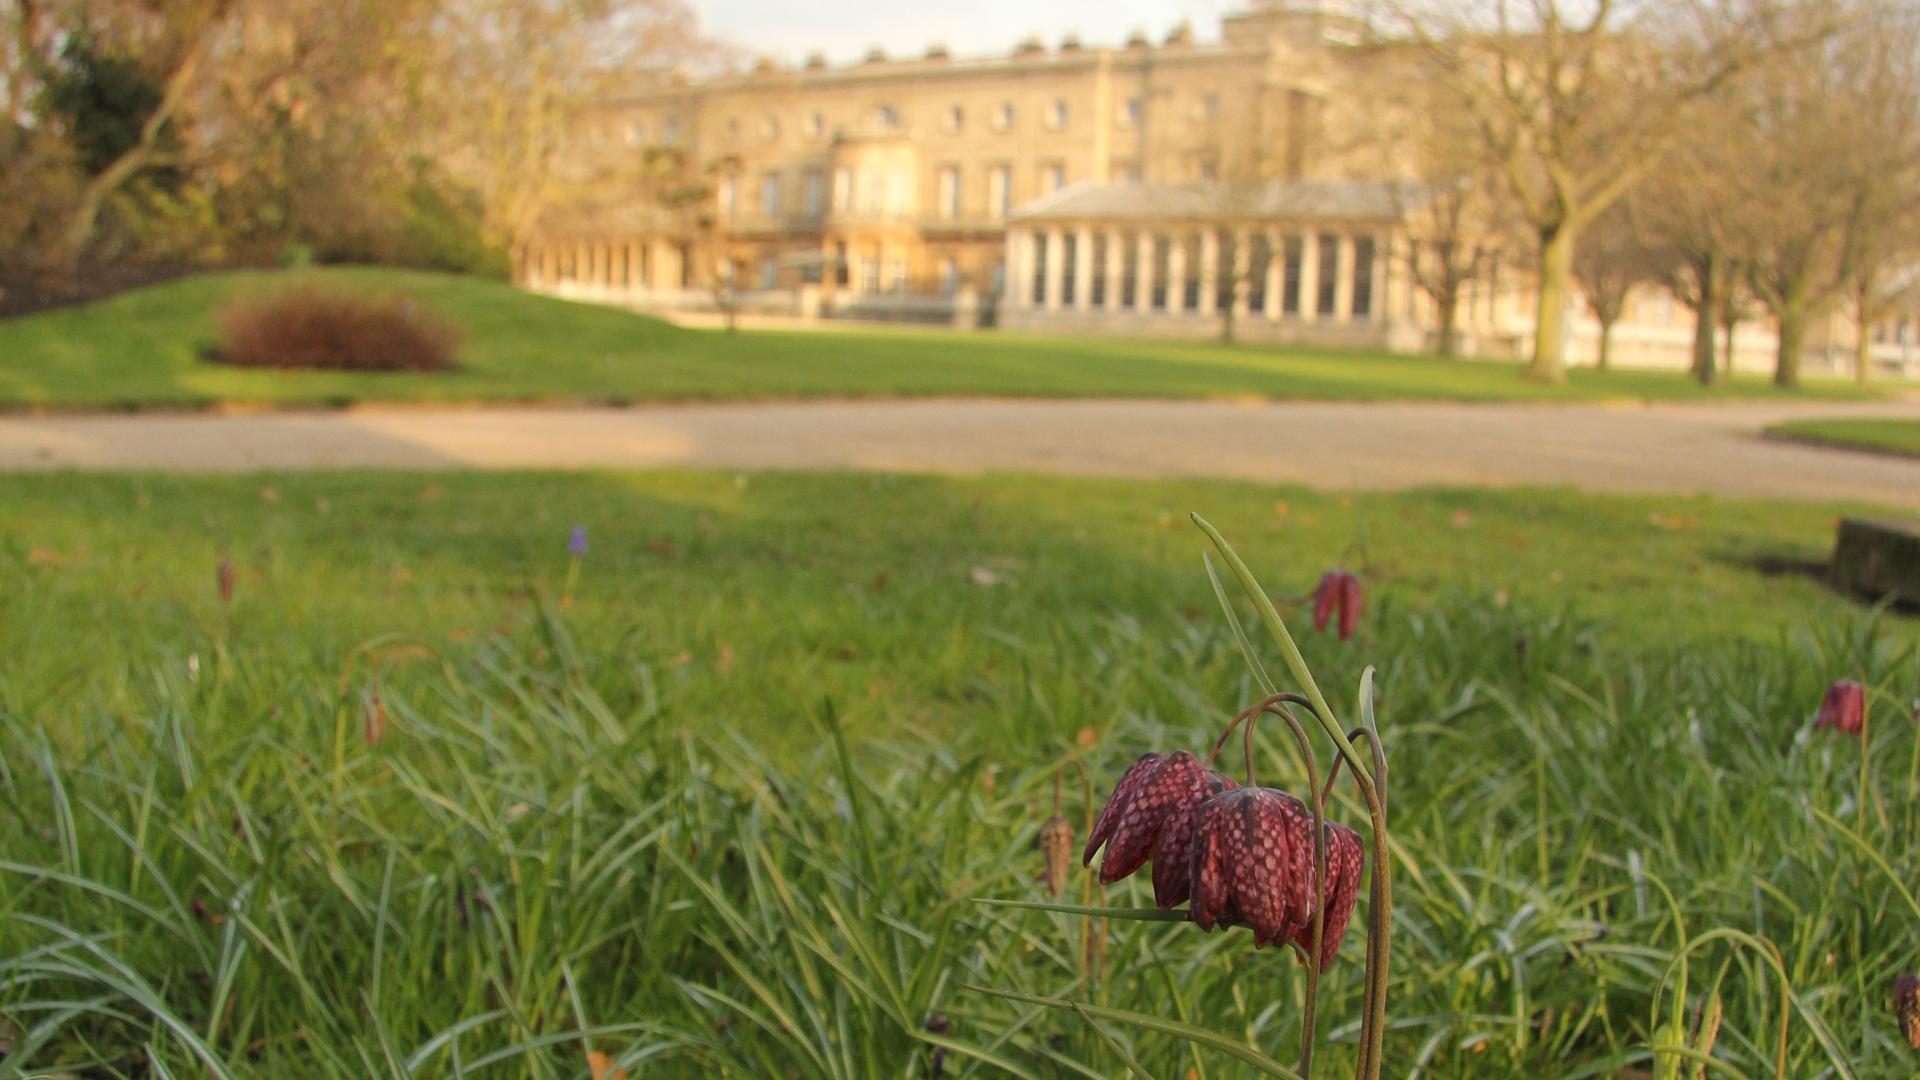 Buckingham Palace with spring flowers (Fritillaries) in the foreground.